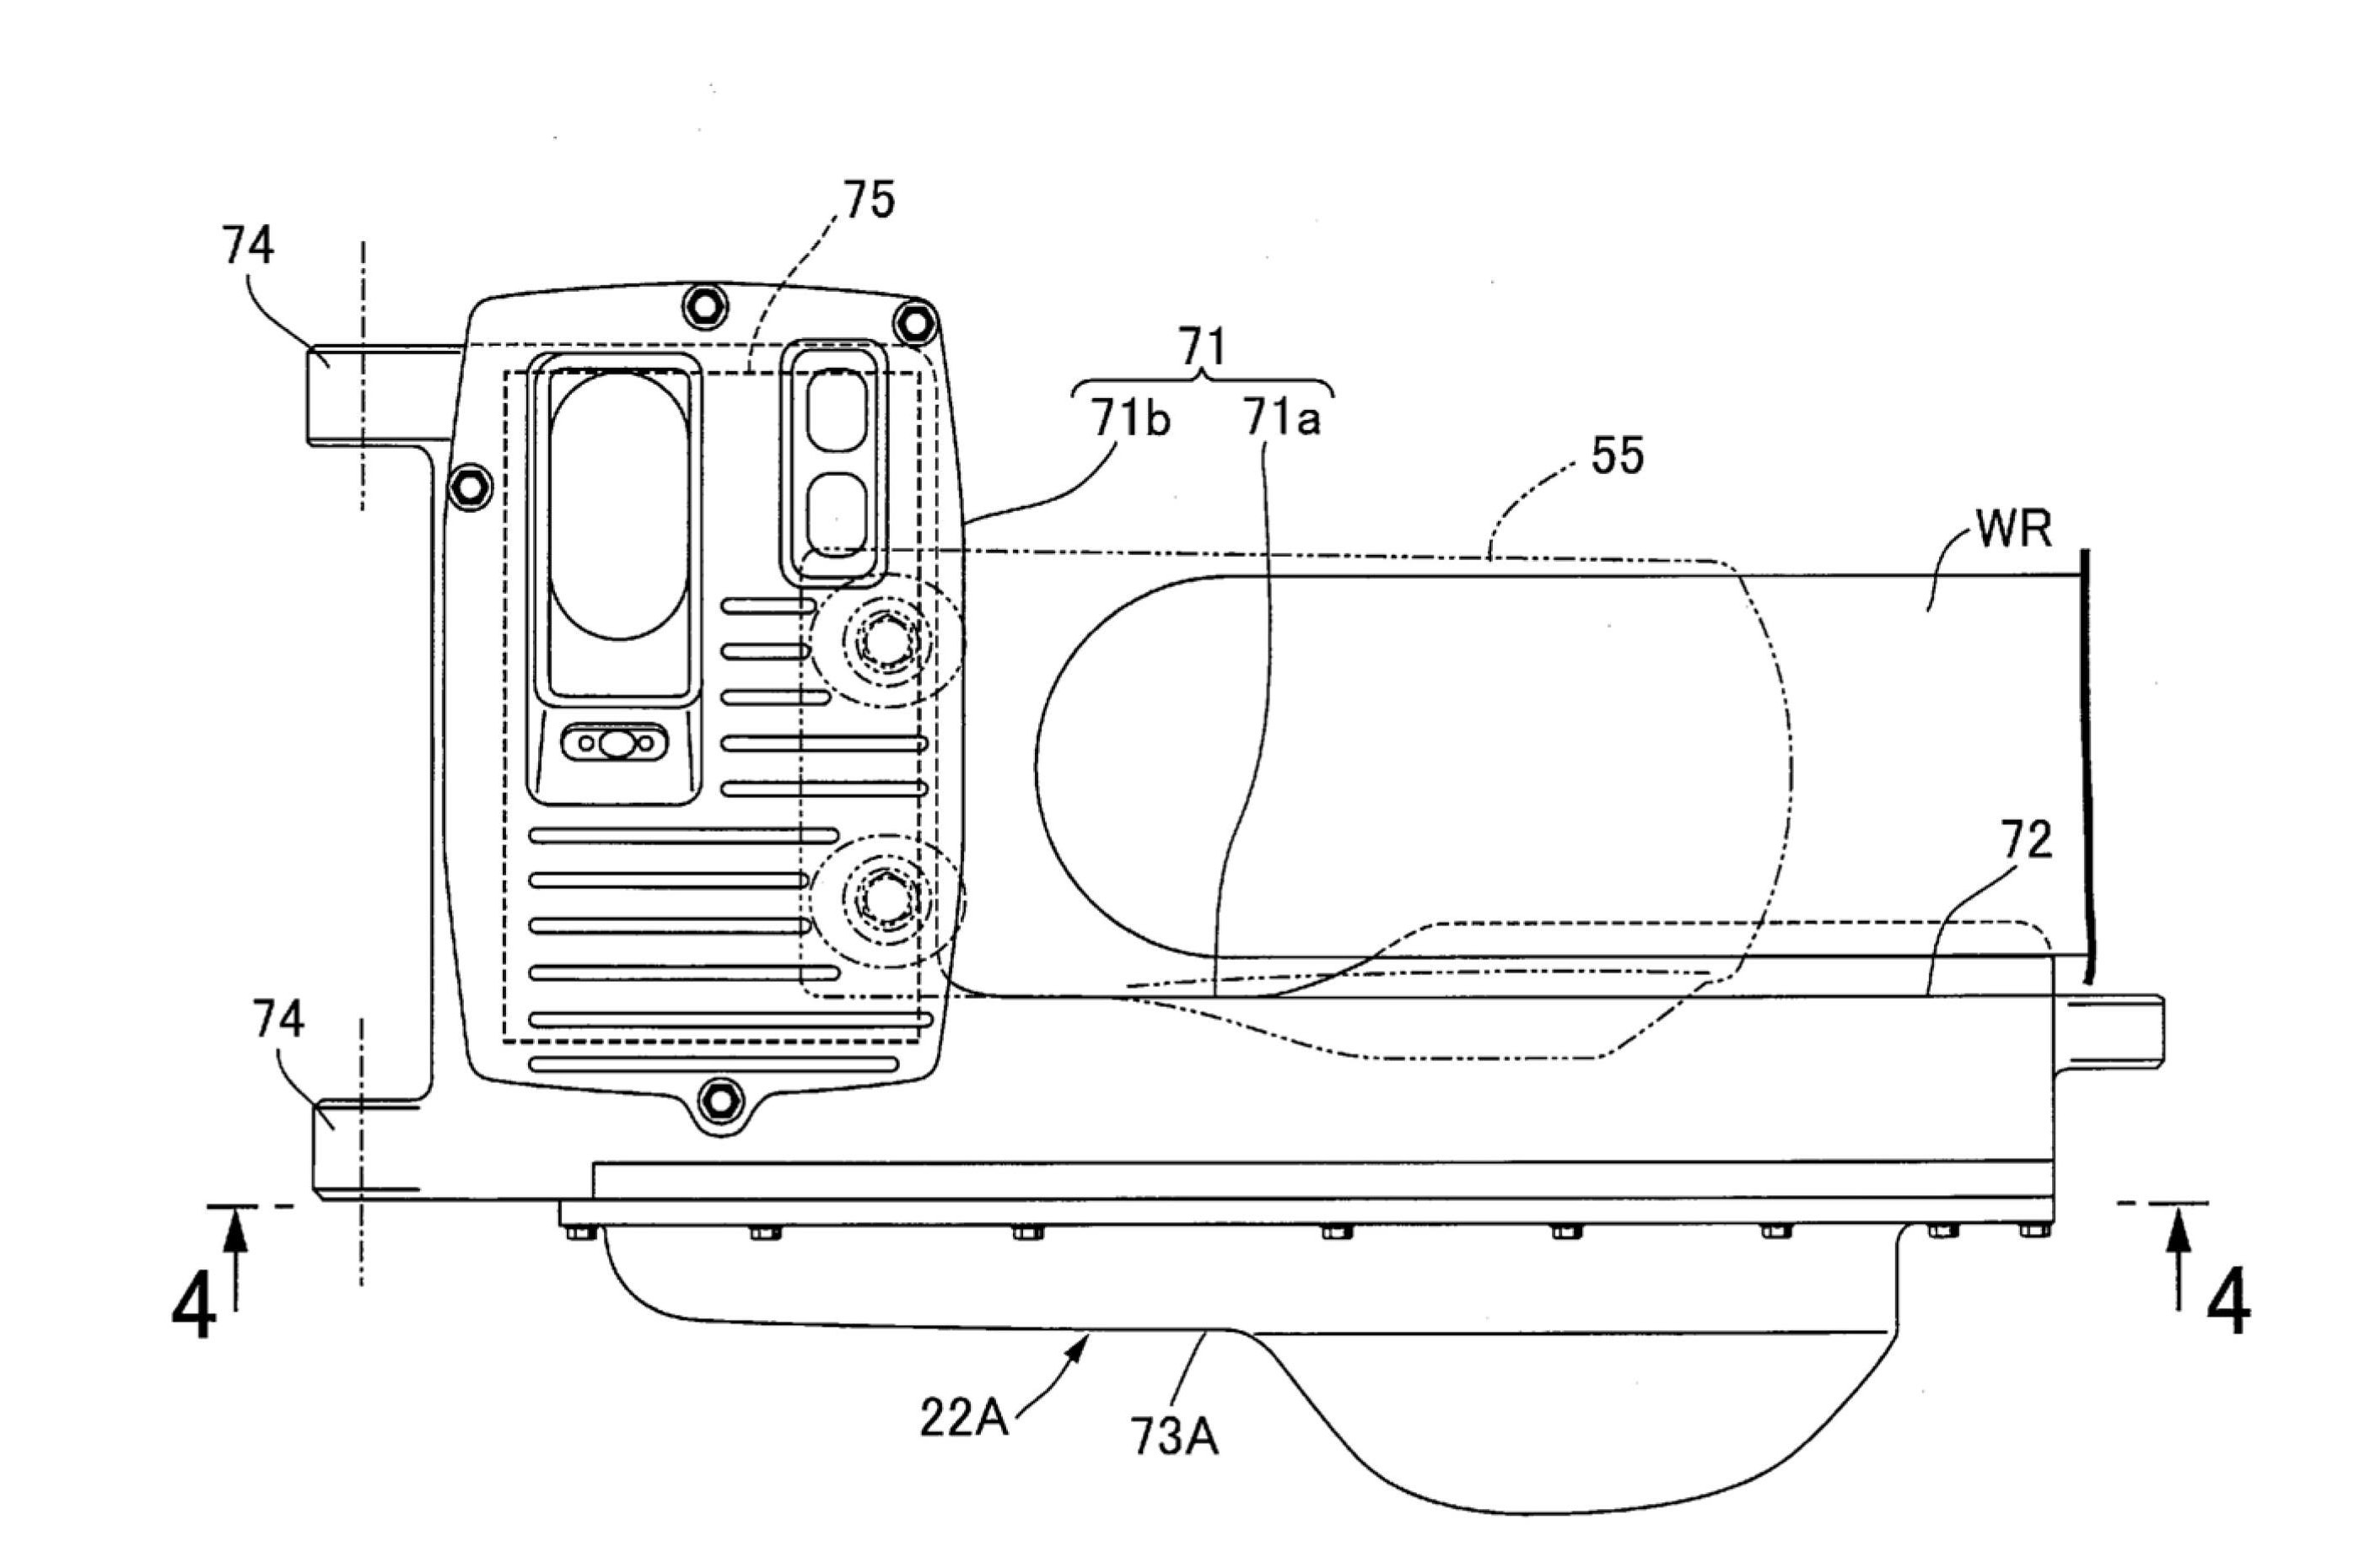 Speed sensor installation structure in a vehicle